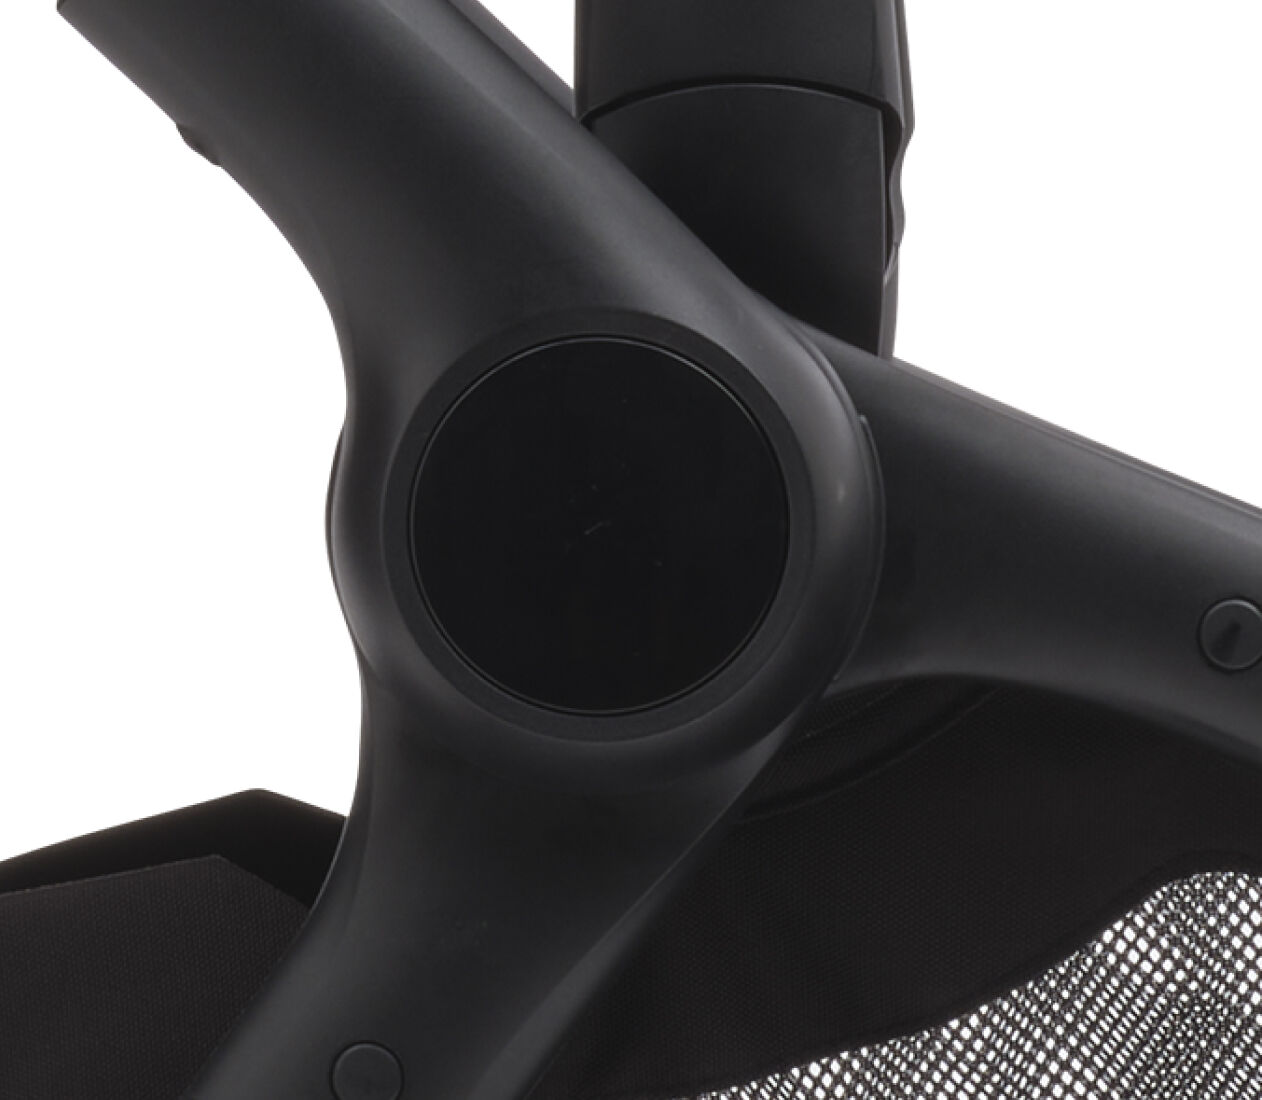  Close up on a Bugaboo pram's chassis with a sleek finish and a matte, black central button.